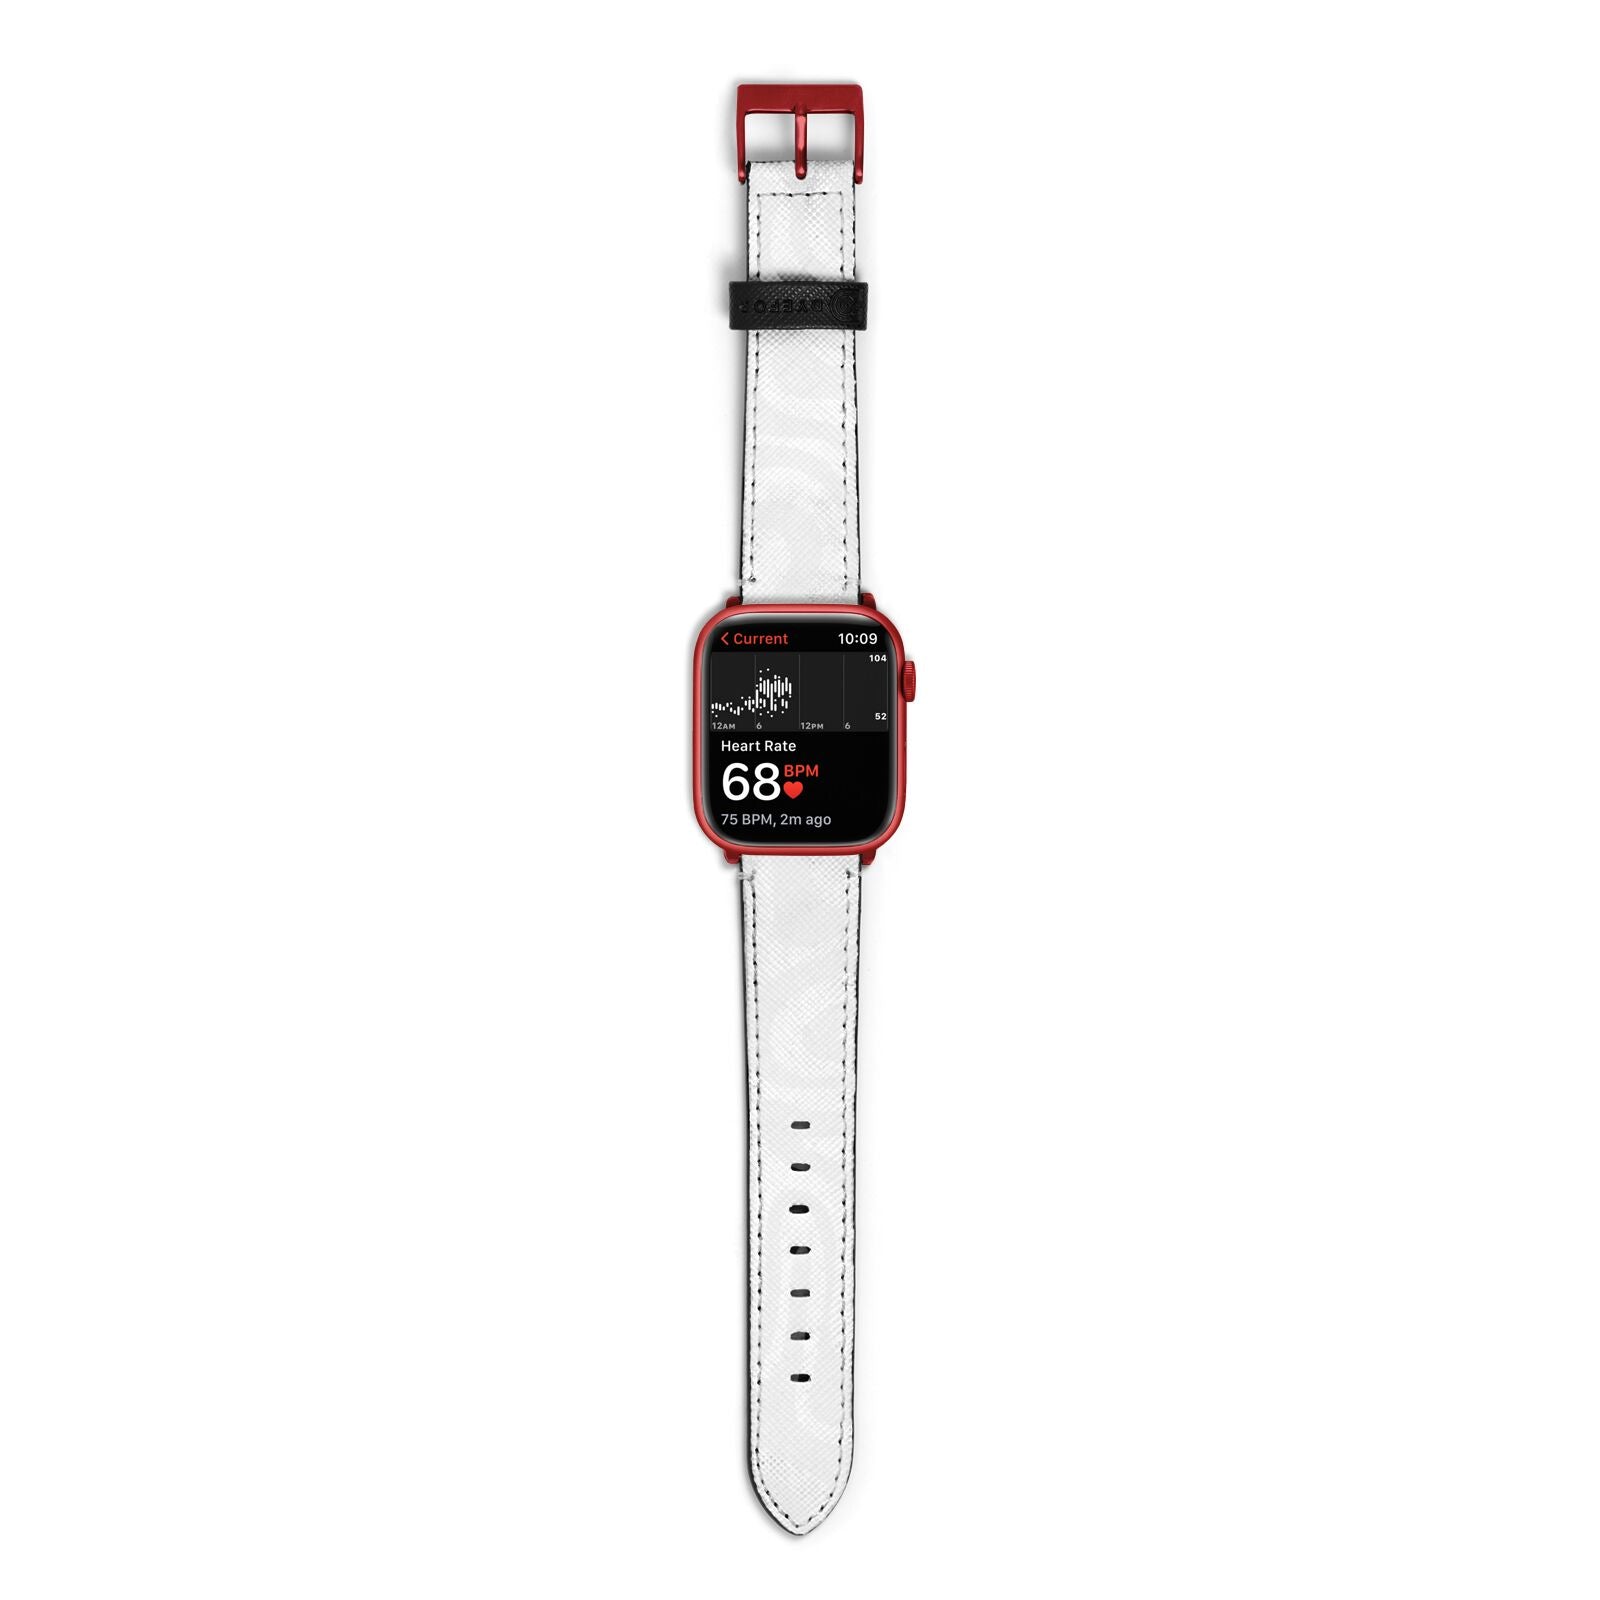 White Swirl Apple Watch Strap Size 38mm with Red Hardware